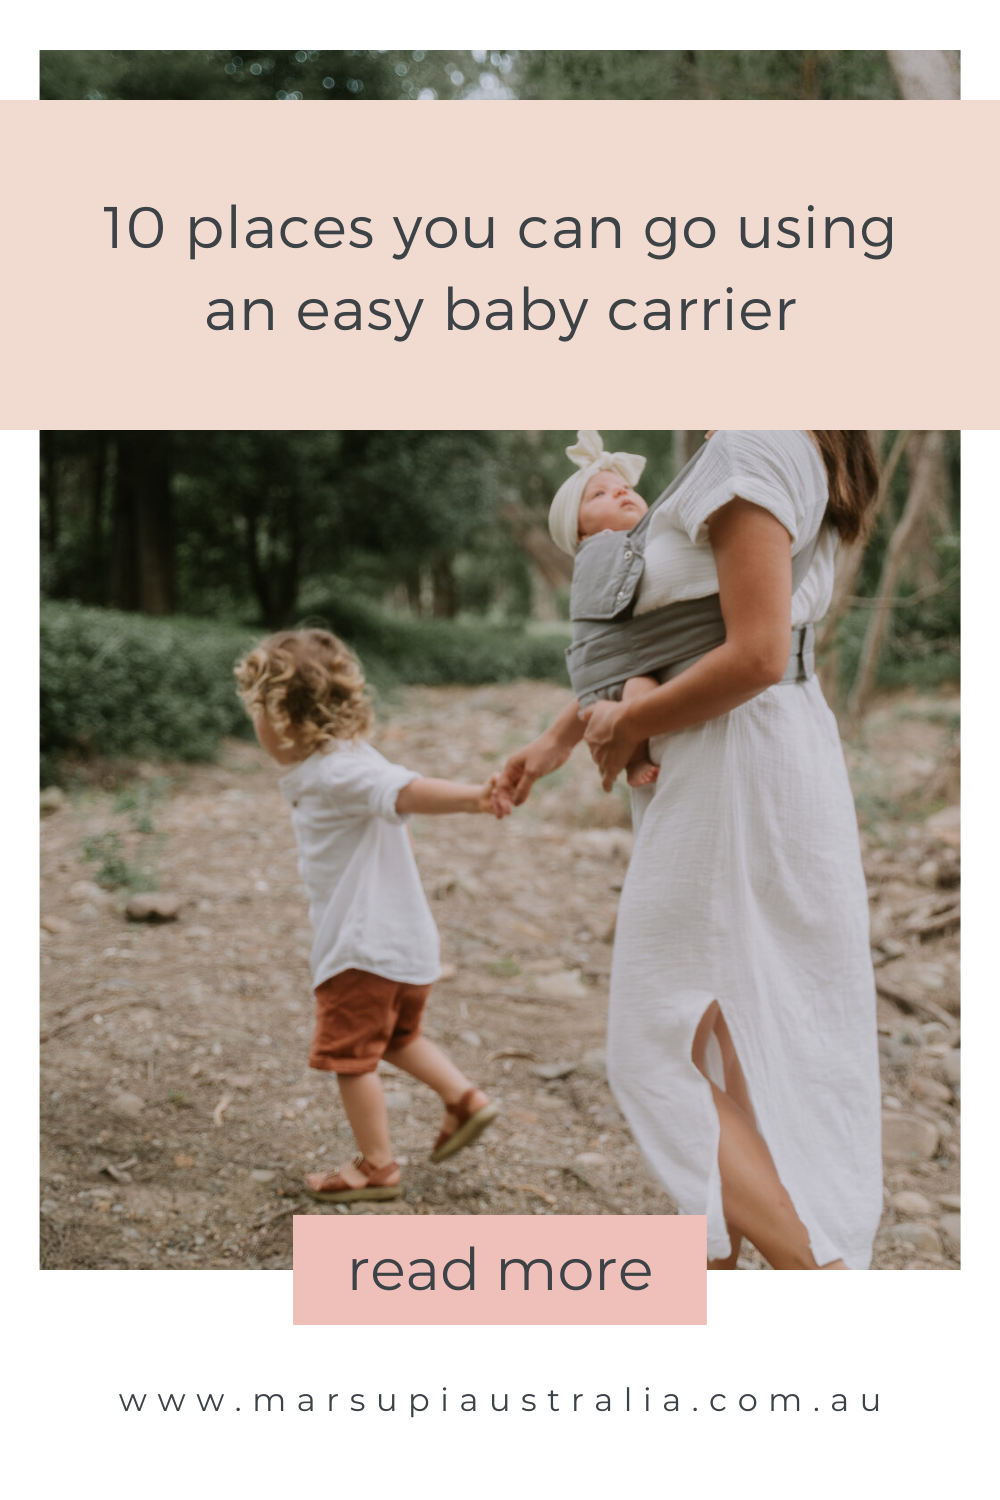 10 places you can go using an easy baby carrier